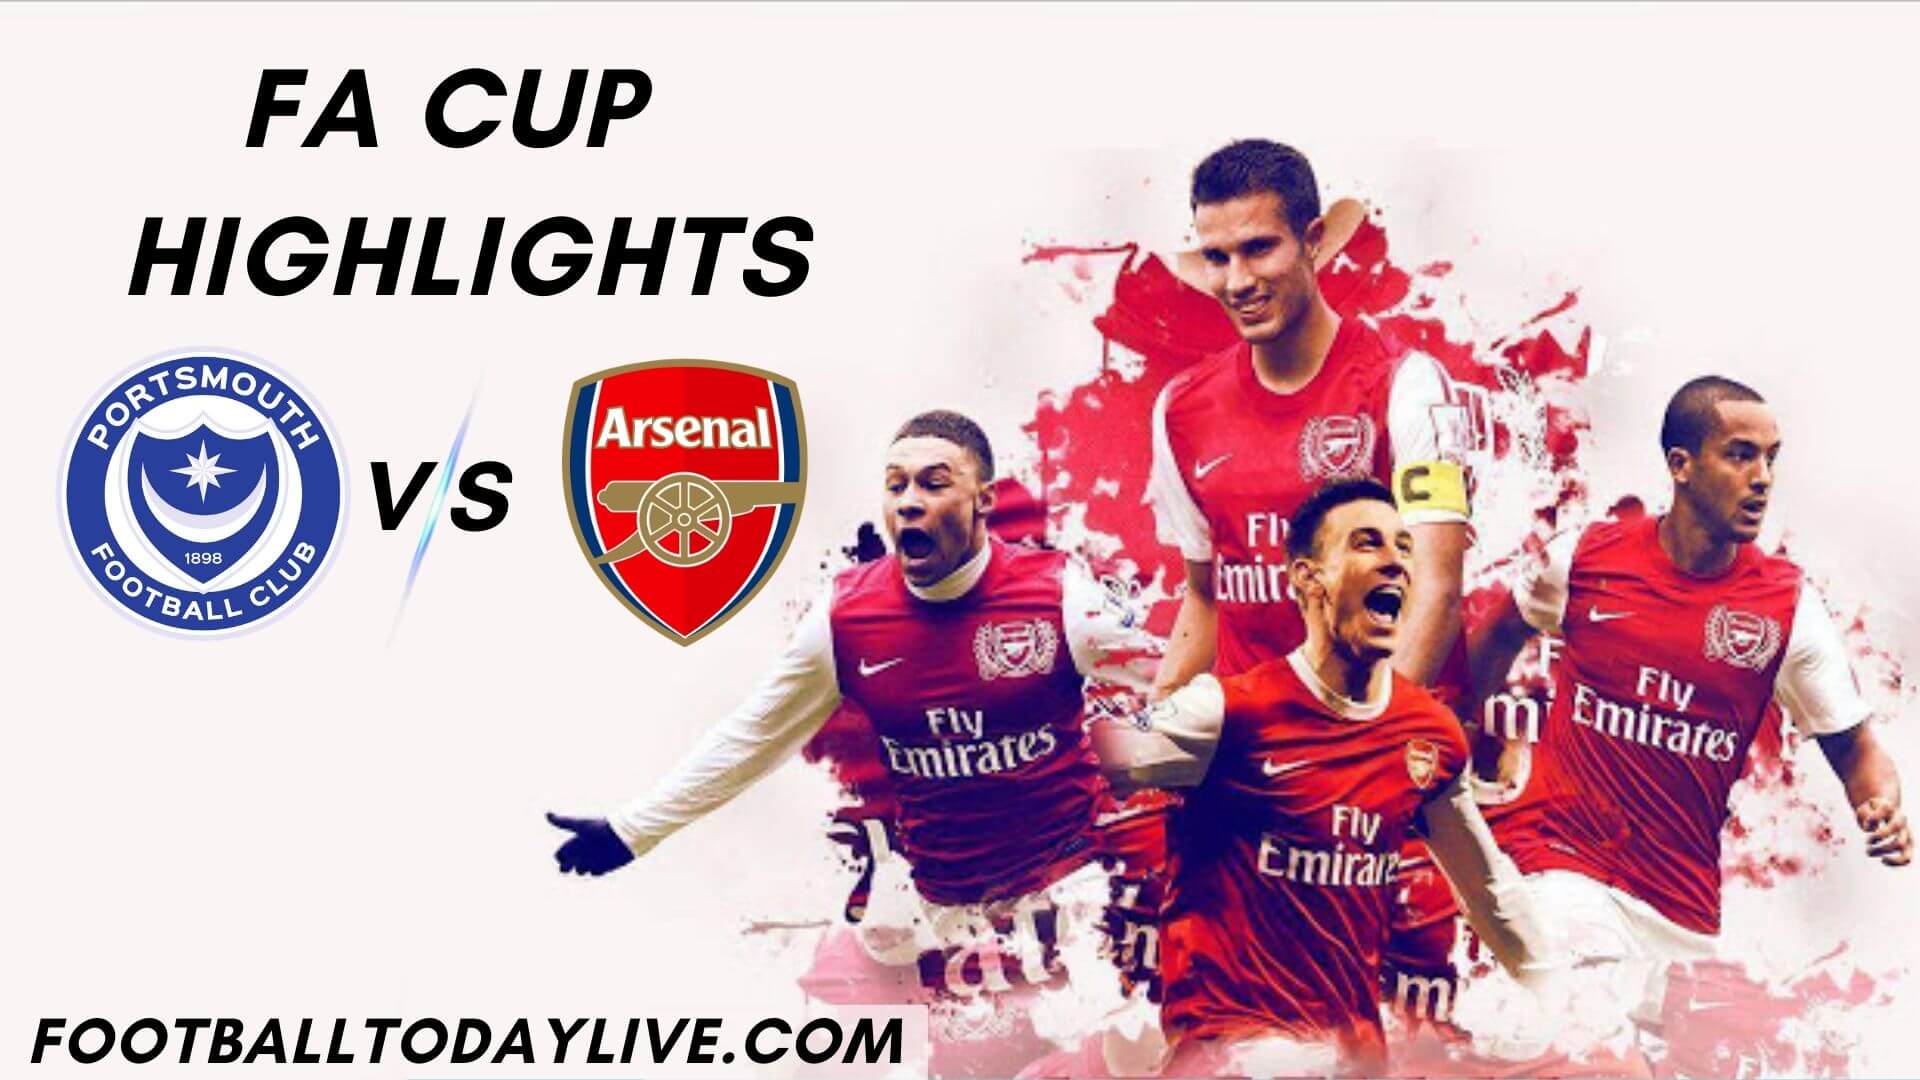 Portsmouth Vs Arsenal Highlights Rd 5 FA Cup 2020